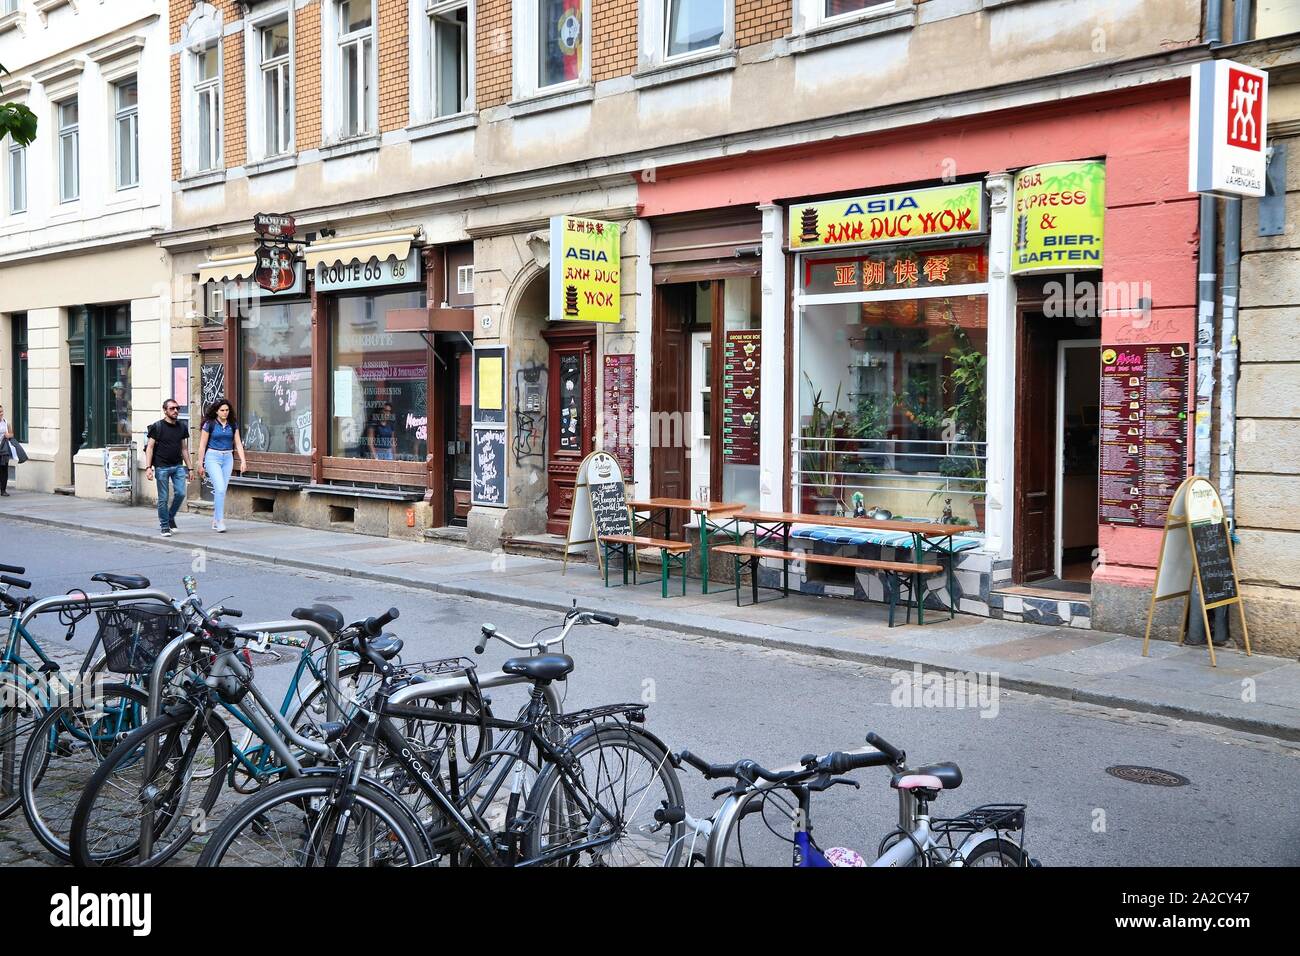 DRESDEN, GERMANY - MAY 10, 2018: People visit restaurants in Neustadt district of Dresden. Neustadt is a hip district of quirky restaurants and altern Stock Photo